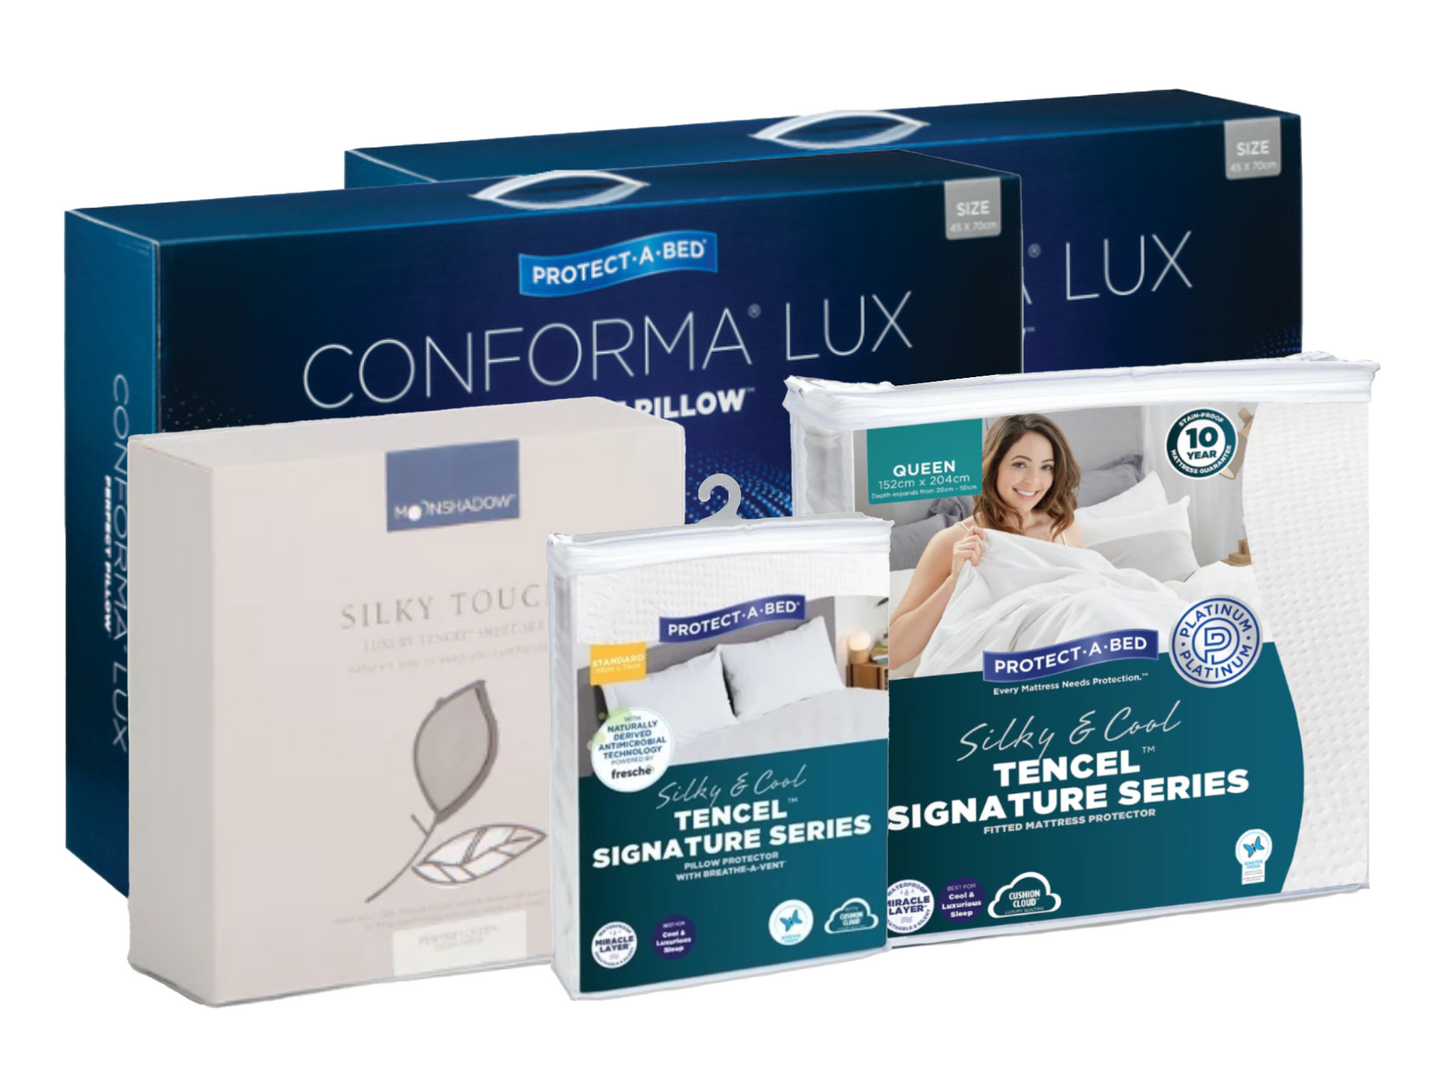 Protect-A-Bed Bundle featuring Tencel® Signature Series Queen